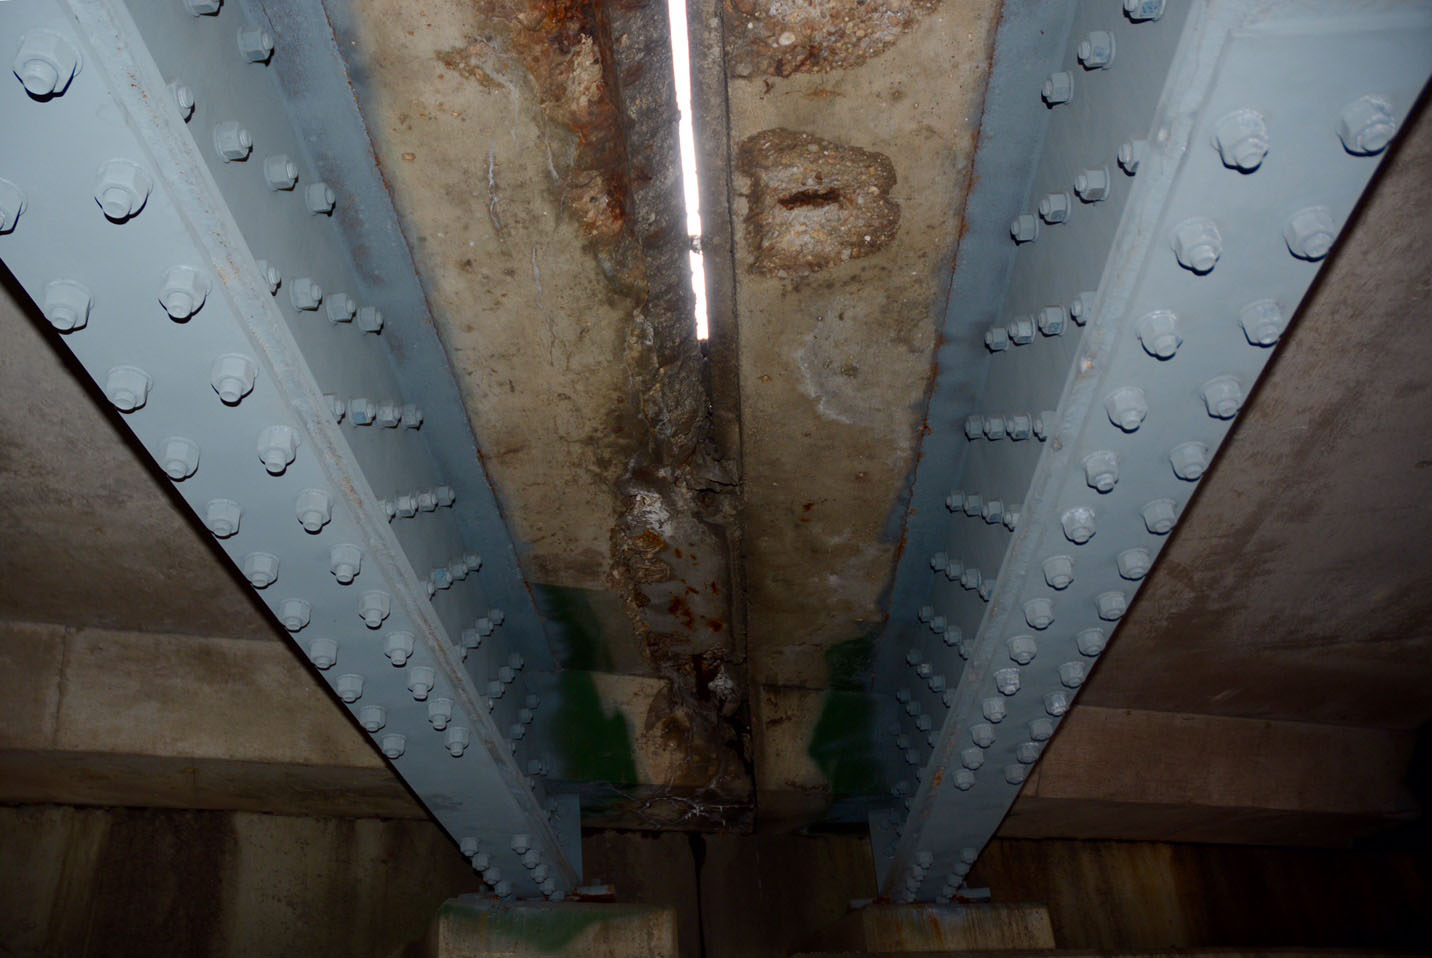 Some of the bridge's girders have been cleaned but other glaring deficiencies remain evident, such as crumbling concrete and separations between expansion joints. (WTOP/Dave Dildine)